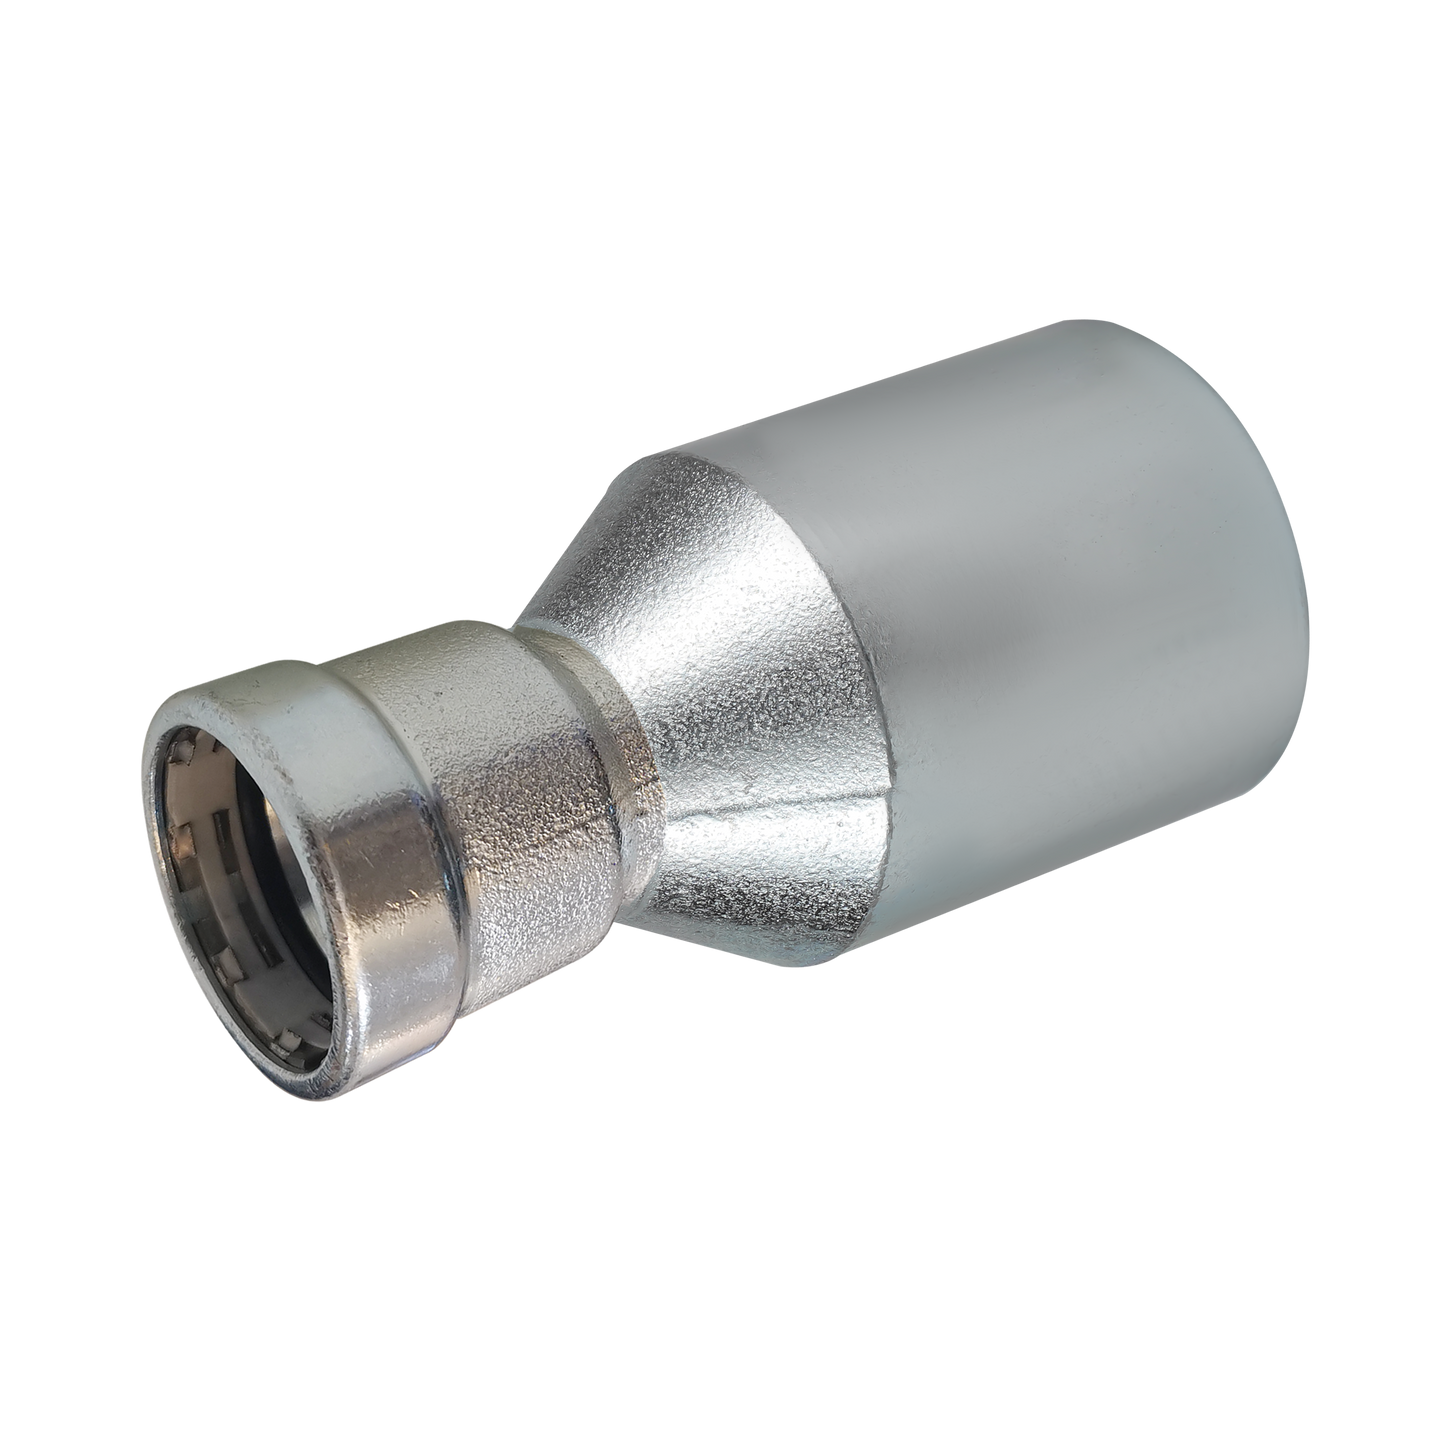 LC-Press Carbon steel Press fittings for thick-wall steel pipe, Reducer with Plain End, 2x1 inch FTGxP